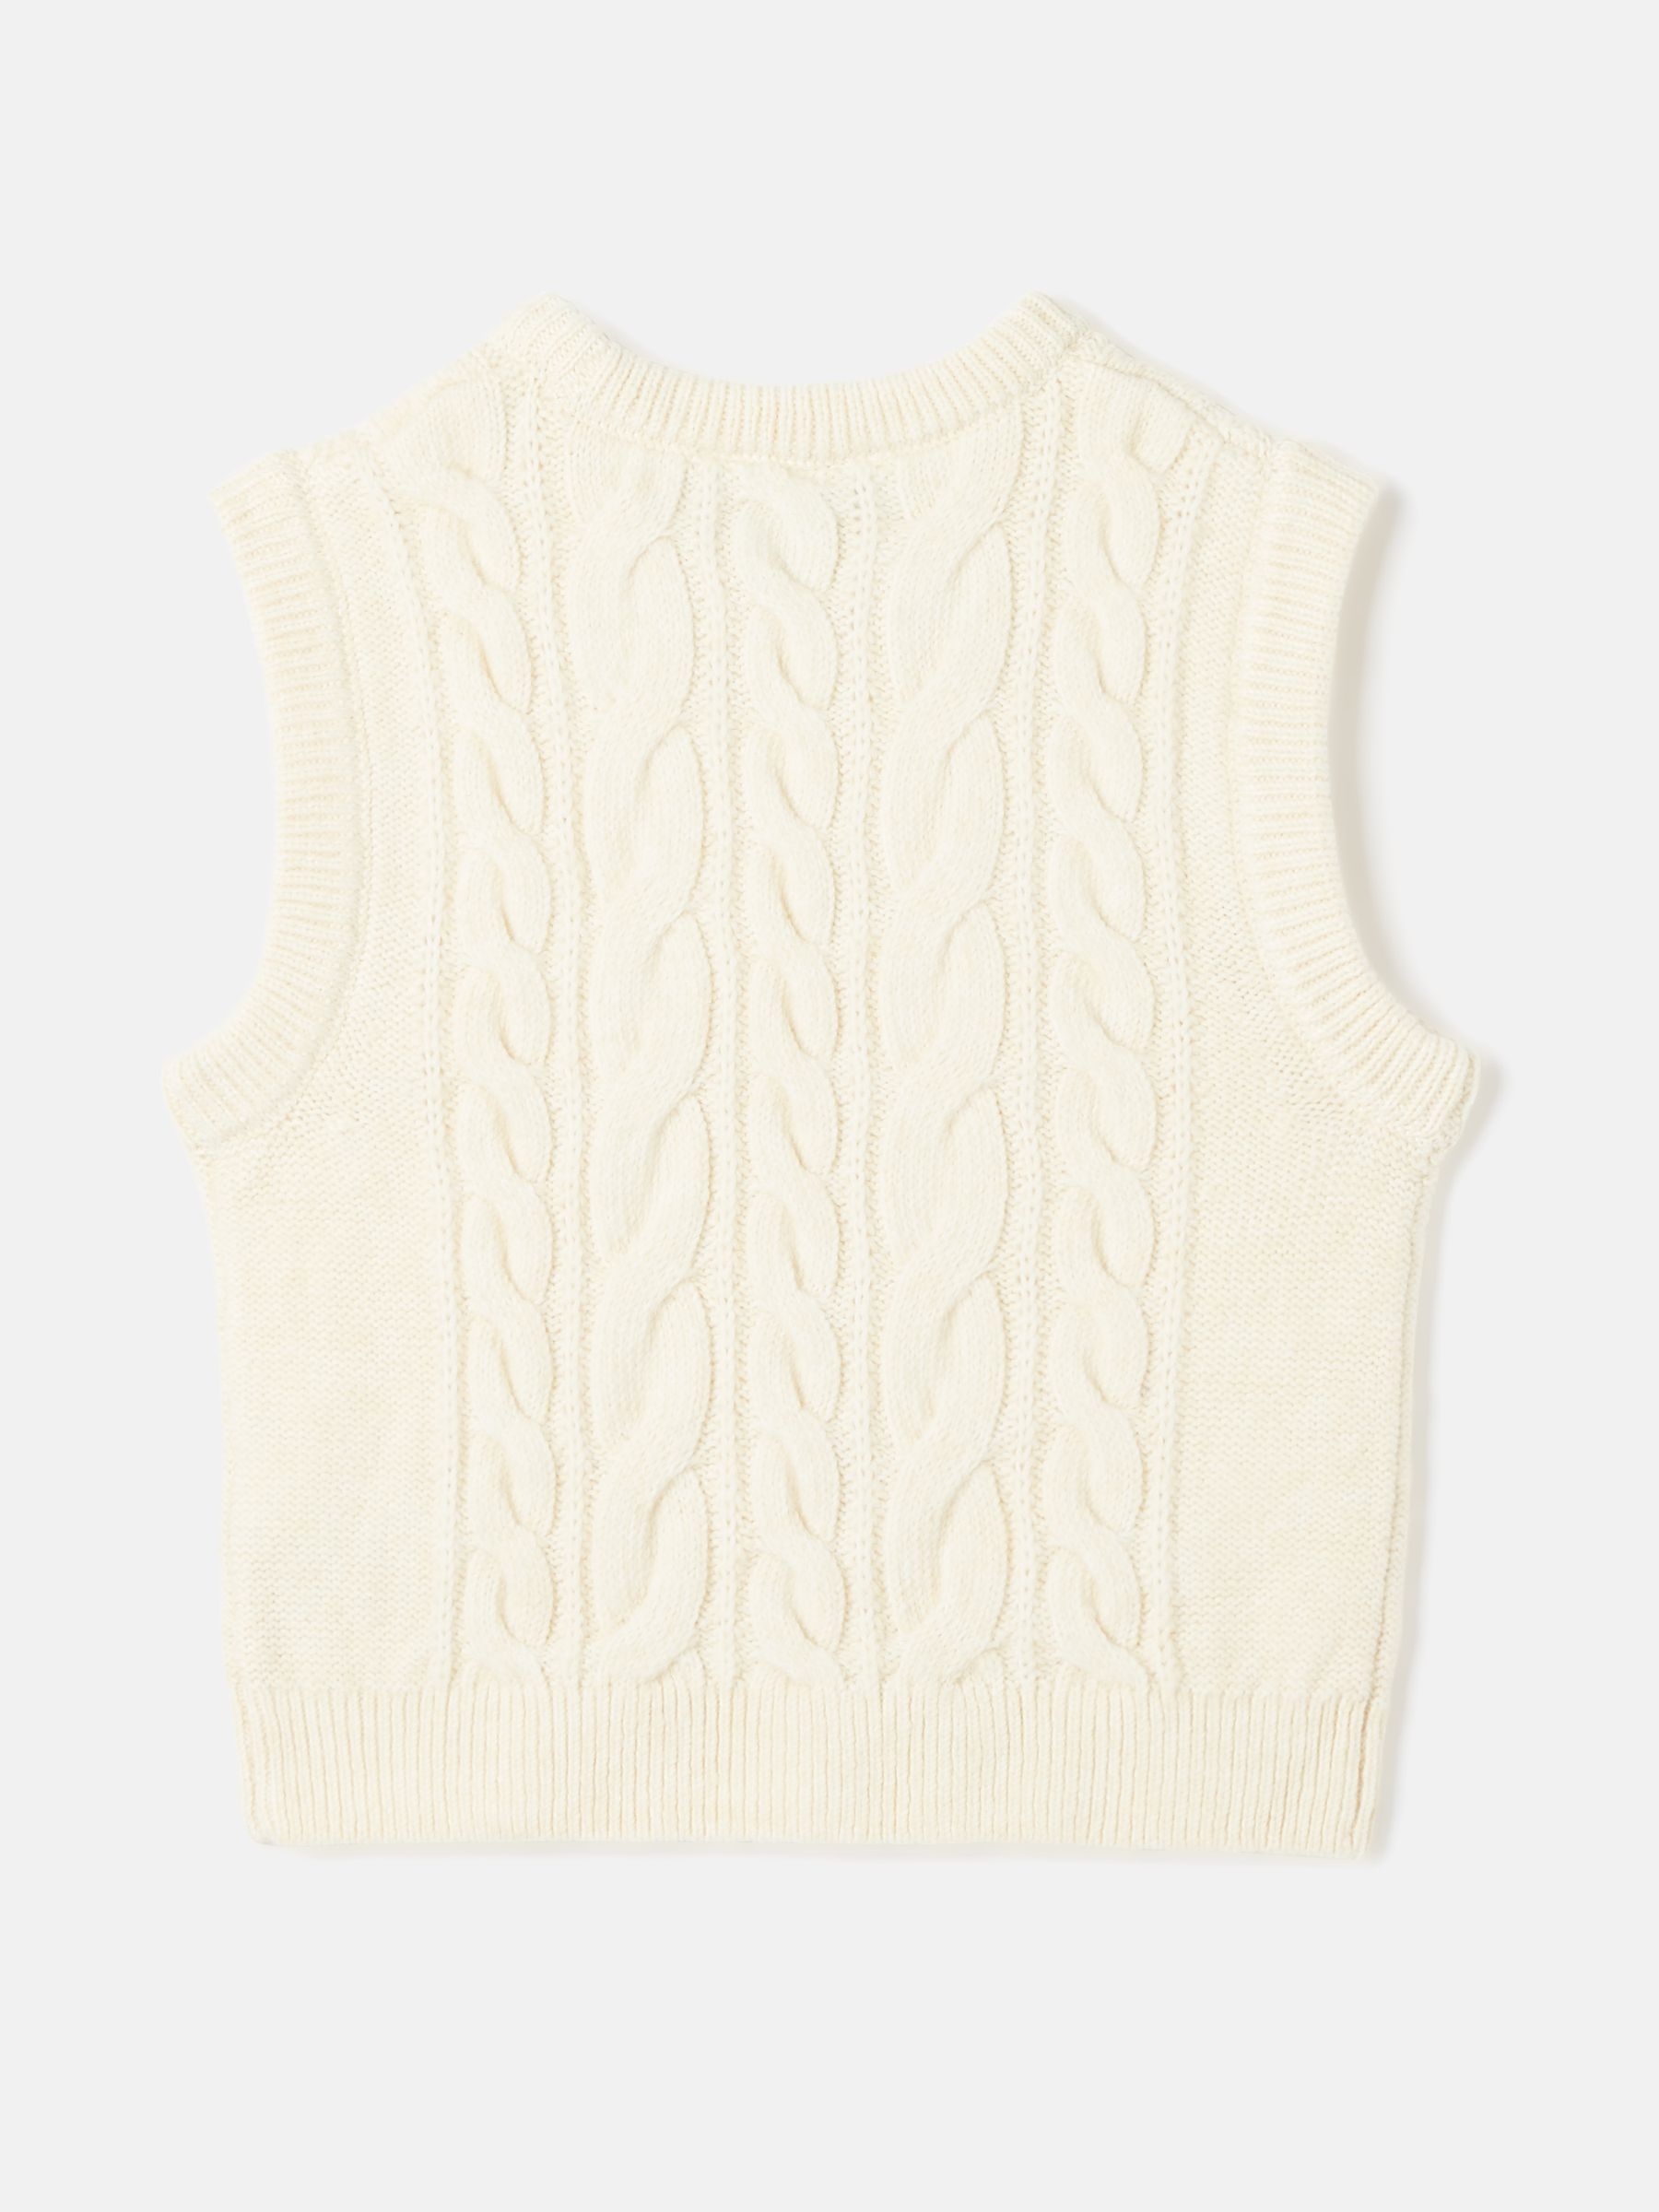 Buy Millie Cream Knitted Jumper from the Joules online shop